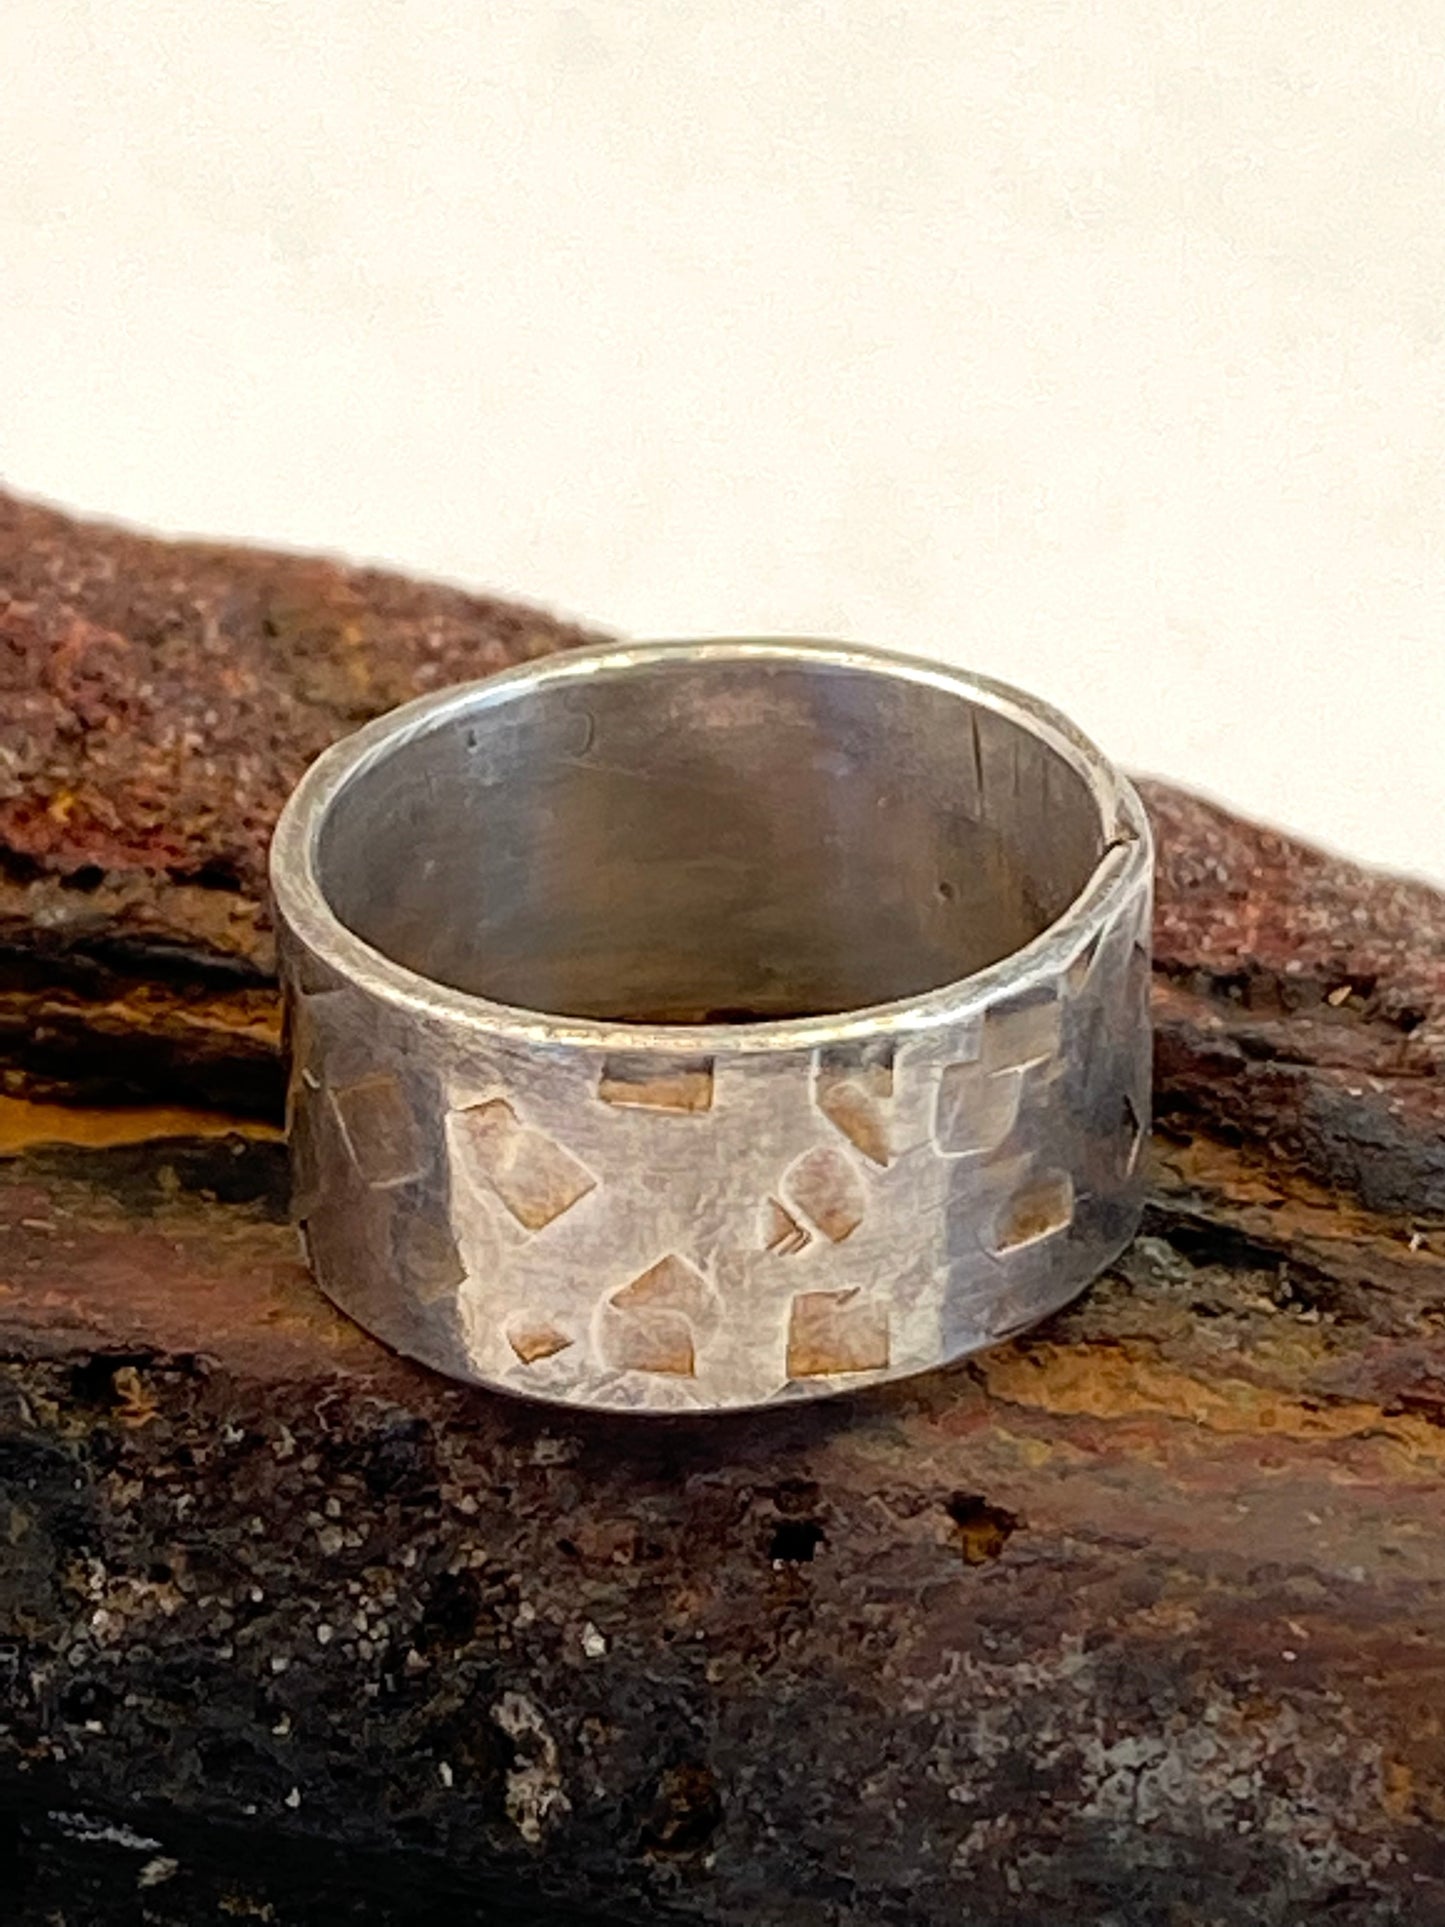 One-of-a-kind hand-crafted sterling silver "cigar band" ring.      Band is beautifully textured with squarish organic shapes.     Gorgeous organic patina that will evolve with you as you wear it.      Ring size 5-1/4.      Style: rustic, boho, funky, organic, earthy yet elegant.